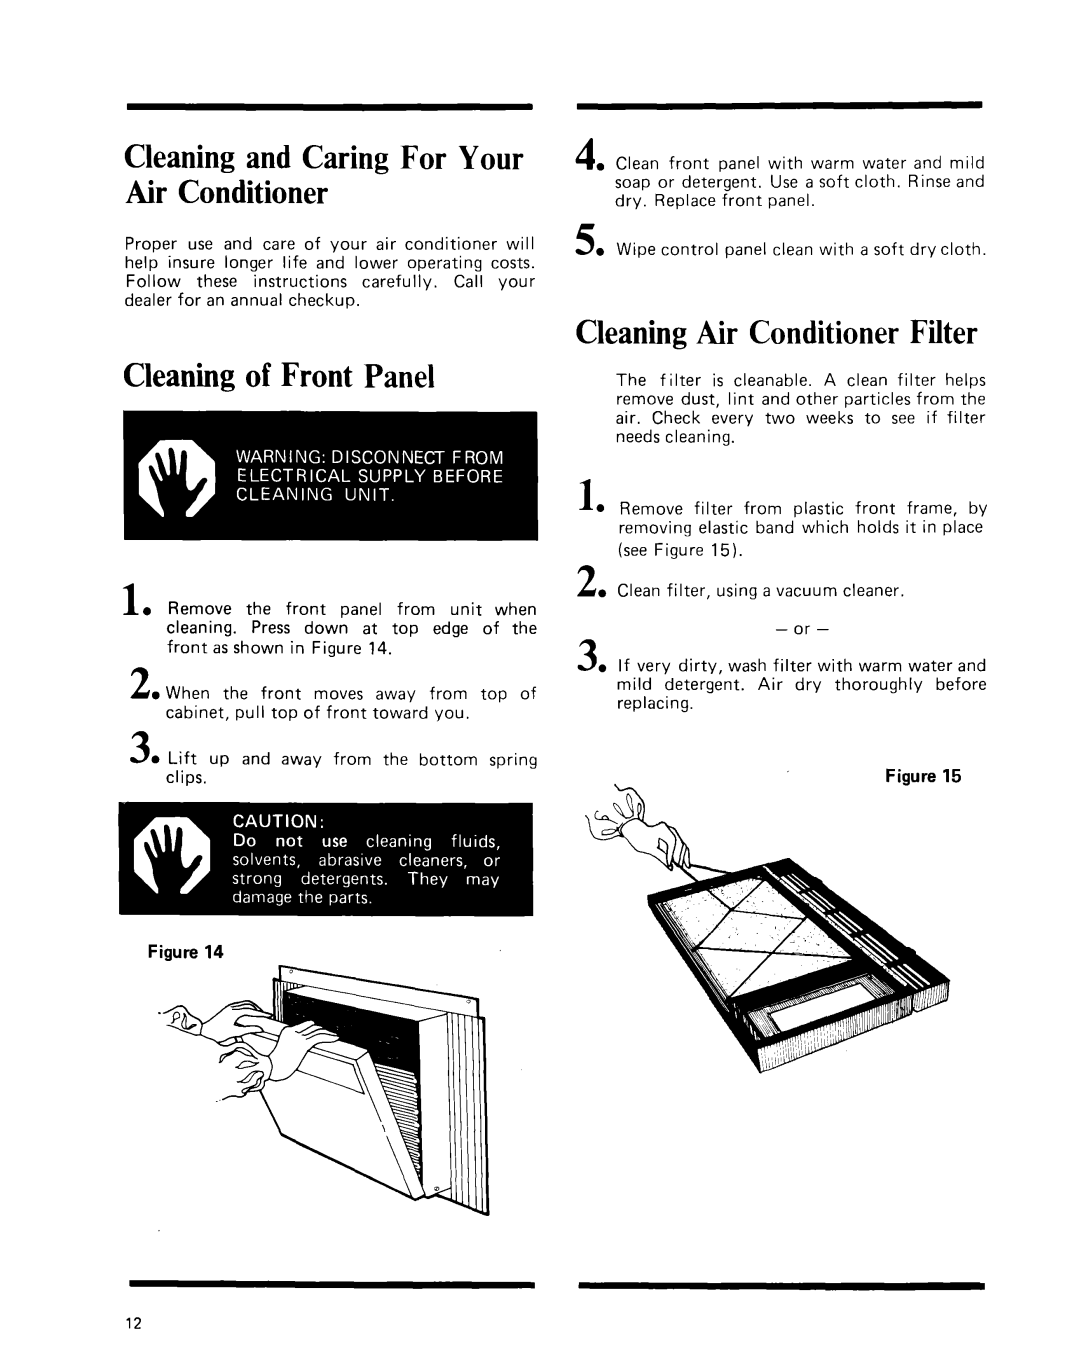 Whirlpool manual Cleaningand Caring For Your Air Conditioner, Cleaningof Front Panel, CleaningAir Conditioner Filter 